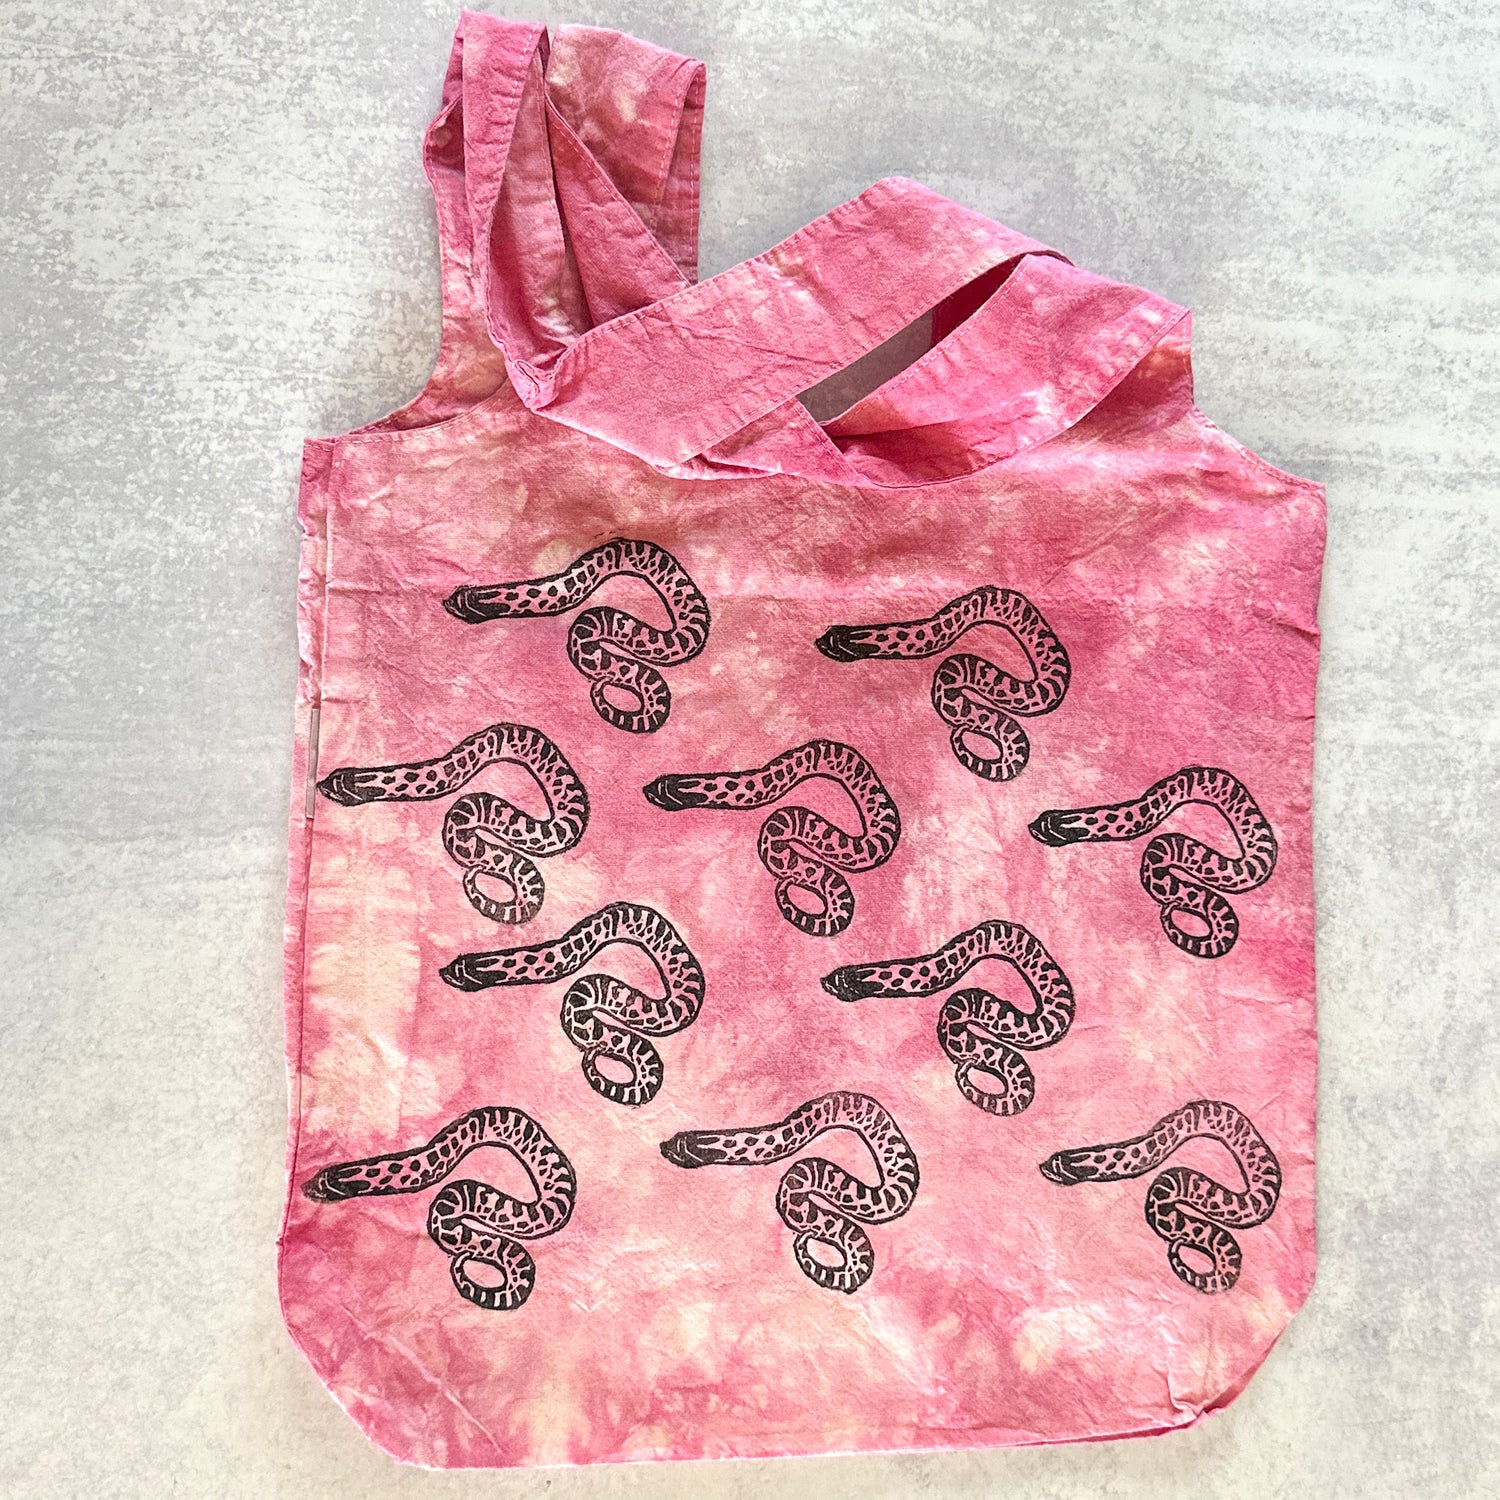 A pink tie-dye tote bag with a repeating pattern of hognose snakes in black ink